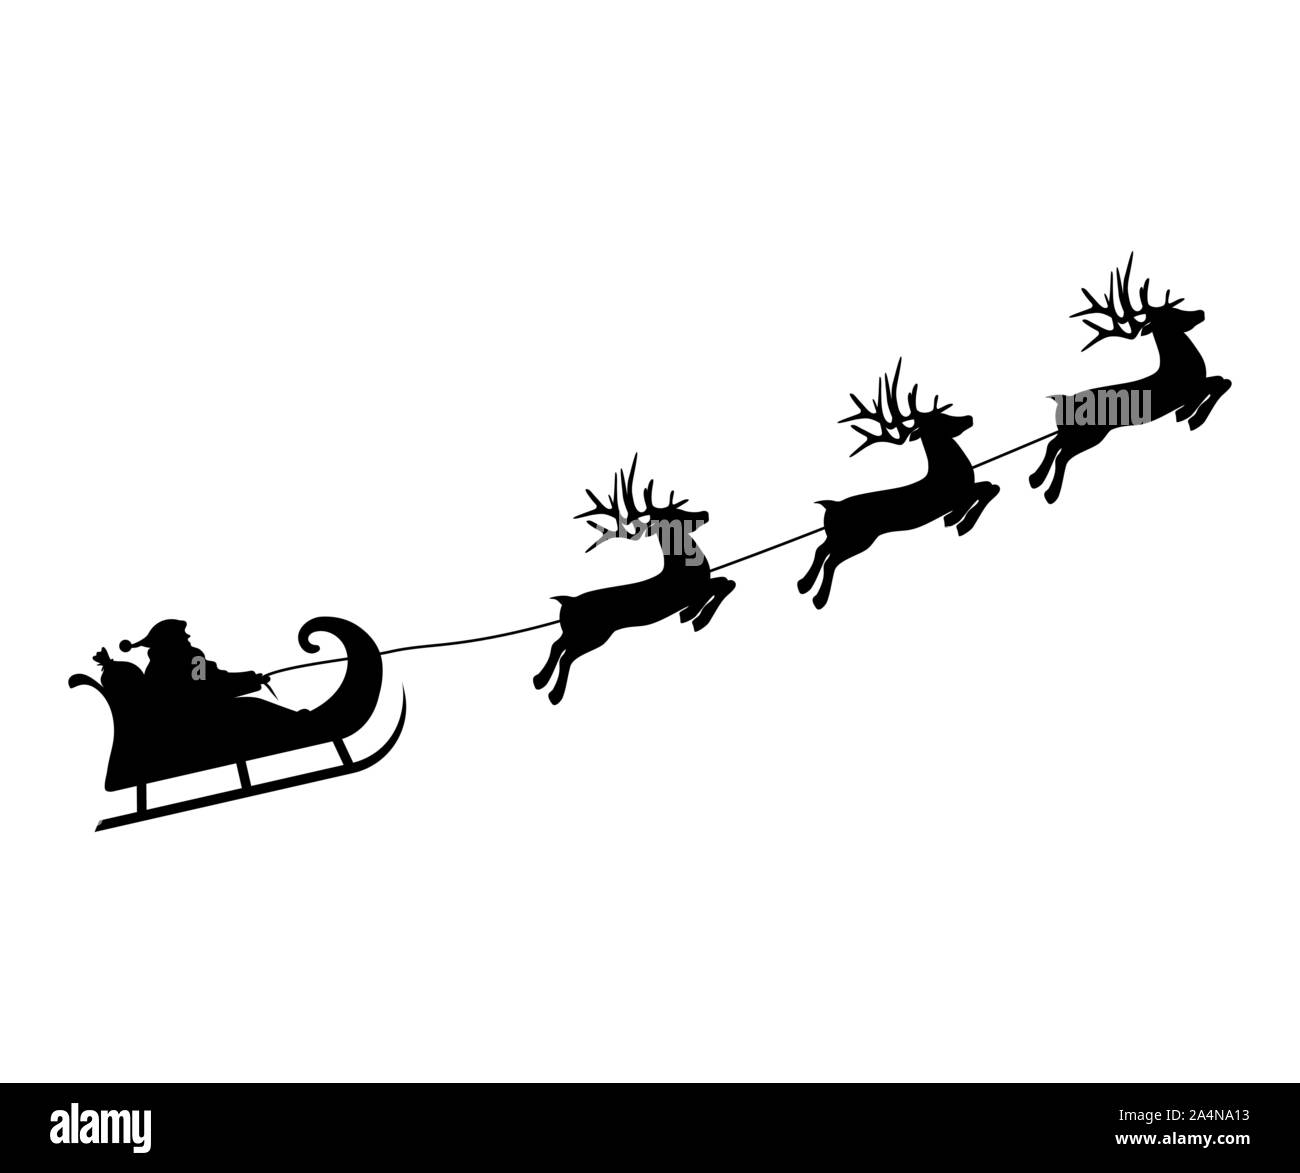 Christmas reindeers are carrying Santa Claus in a sleigh with gifts. Stock Vector